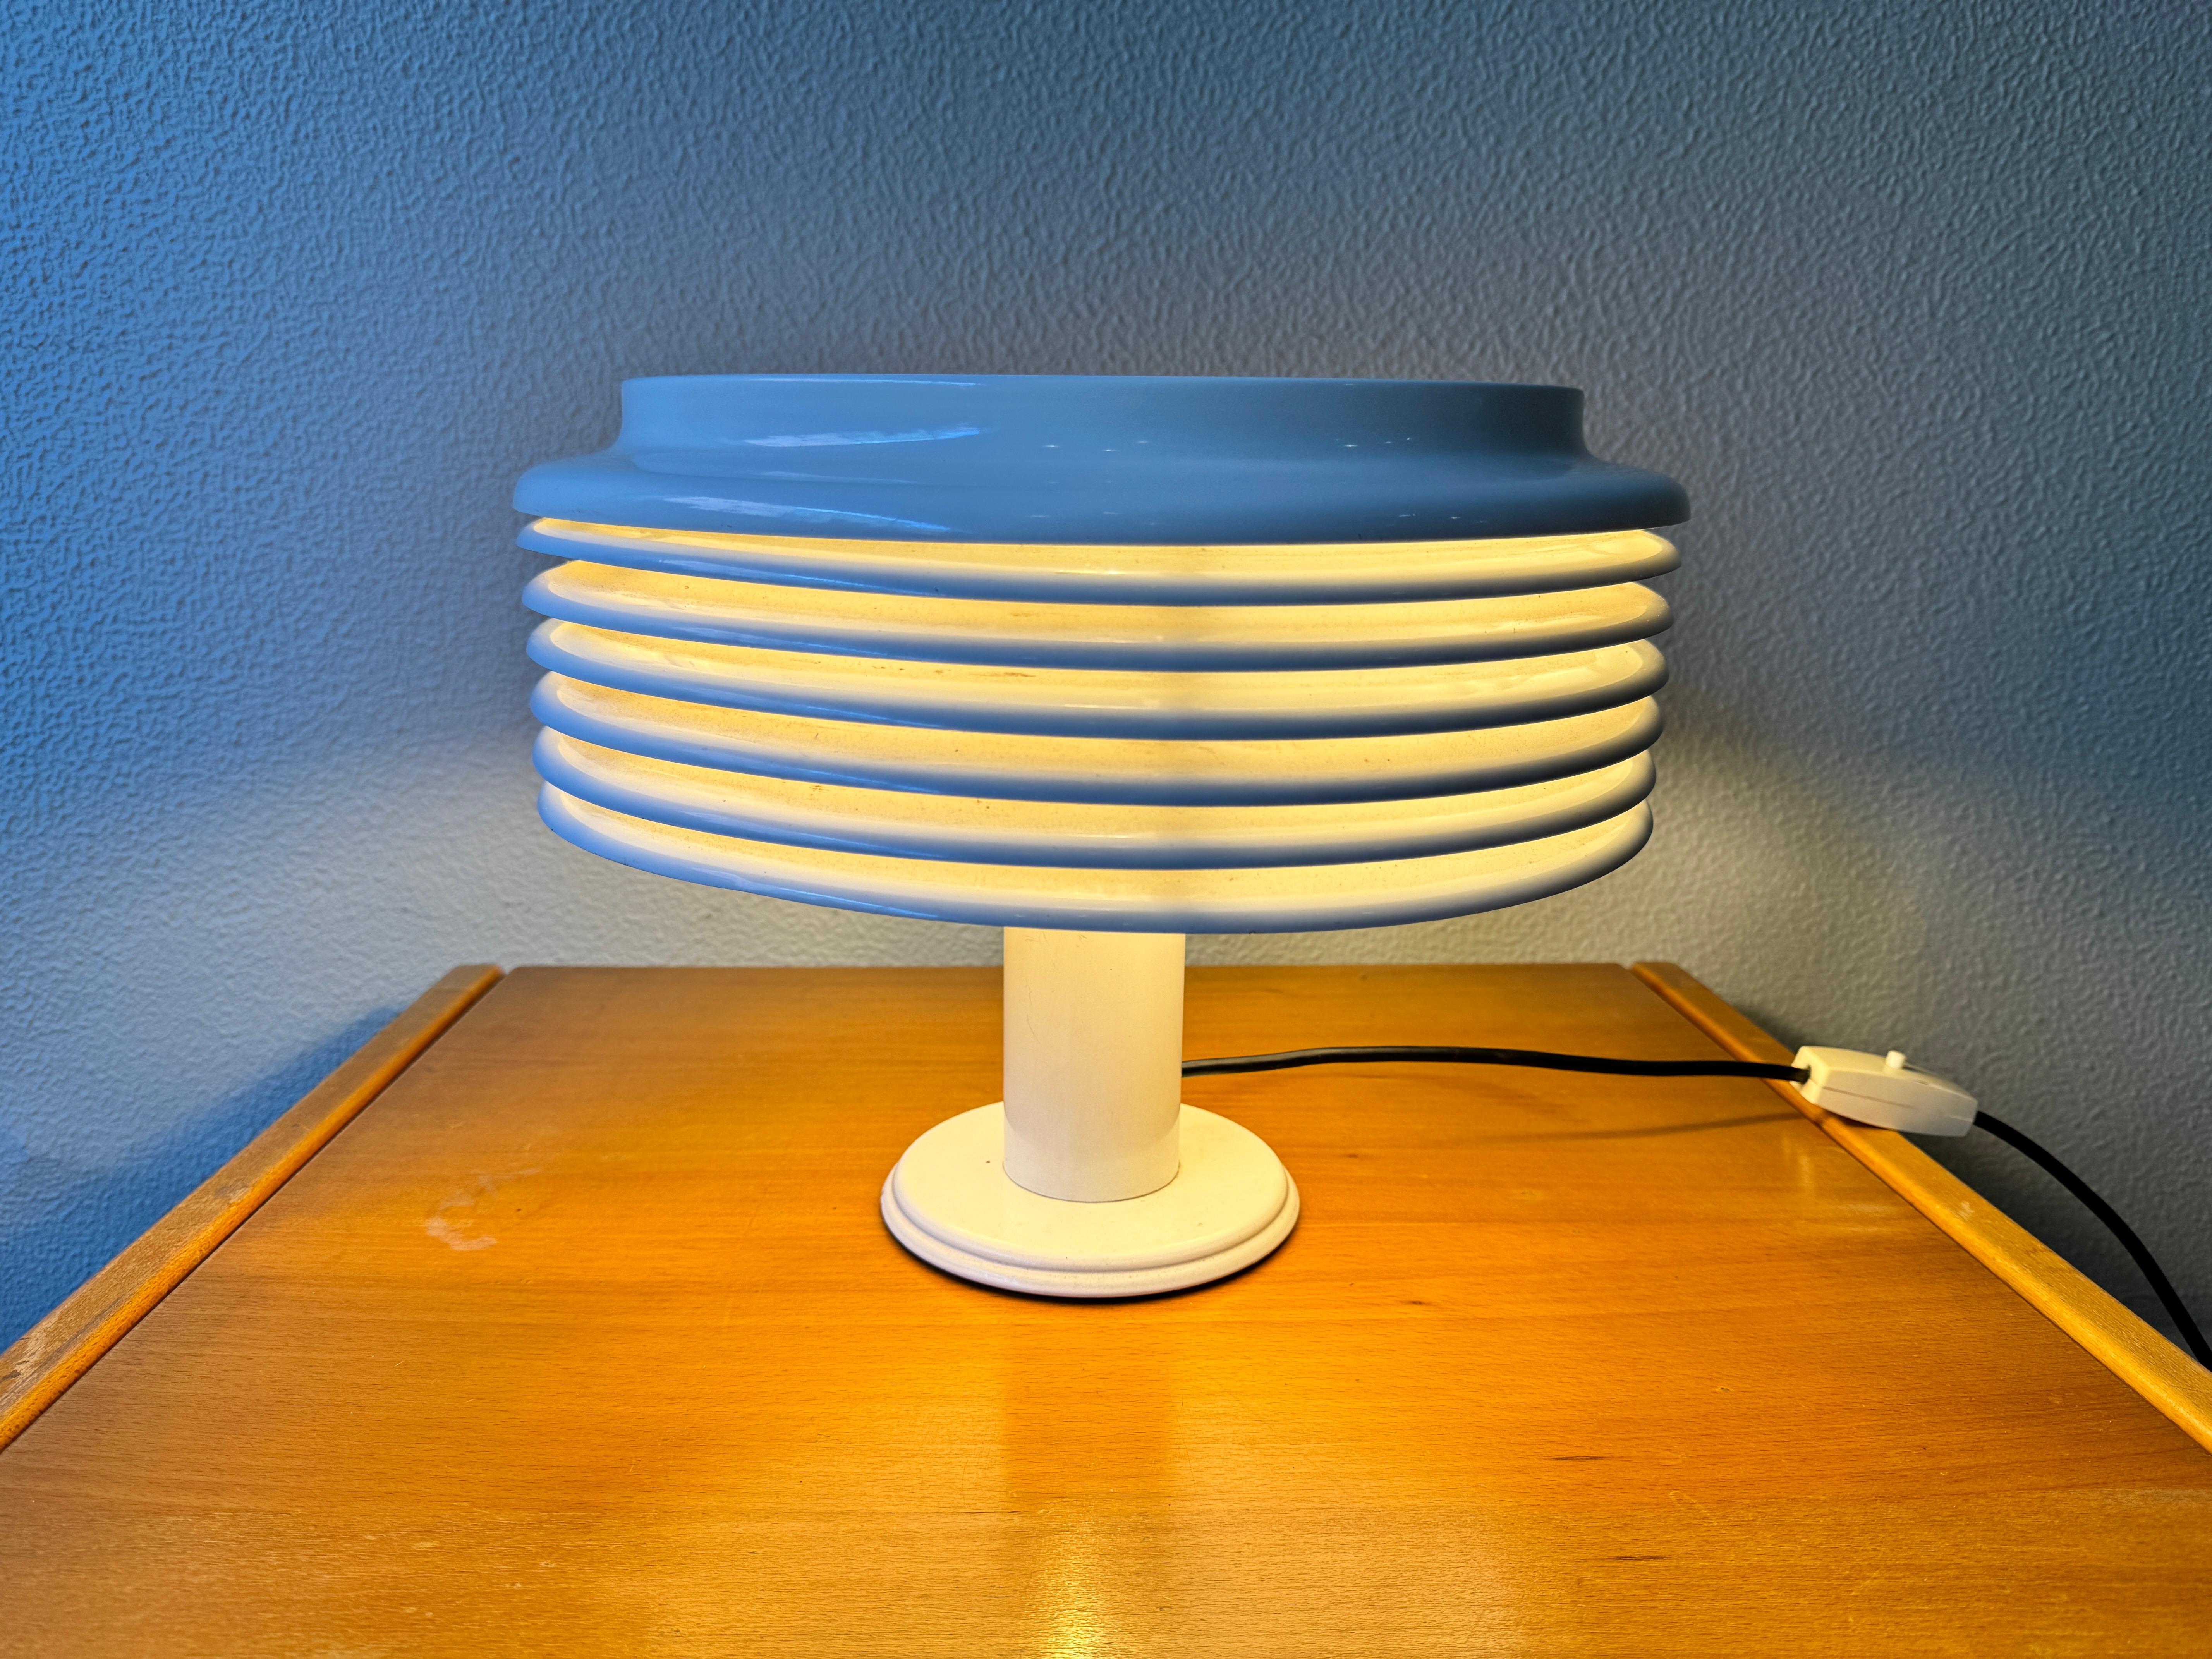 The Saturno Table Lamp by Kazuo Motozawa for Staff Leuchten is a stunning vintage piece from the 1970s. The lamp features a sleek white painted metal base and tube, topped with a unique mushroom-shaped lampshade made of slat rings. The lamp emits an